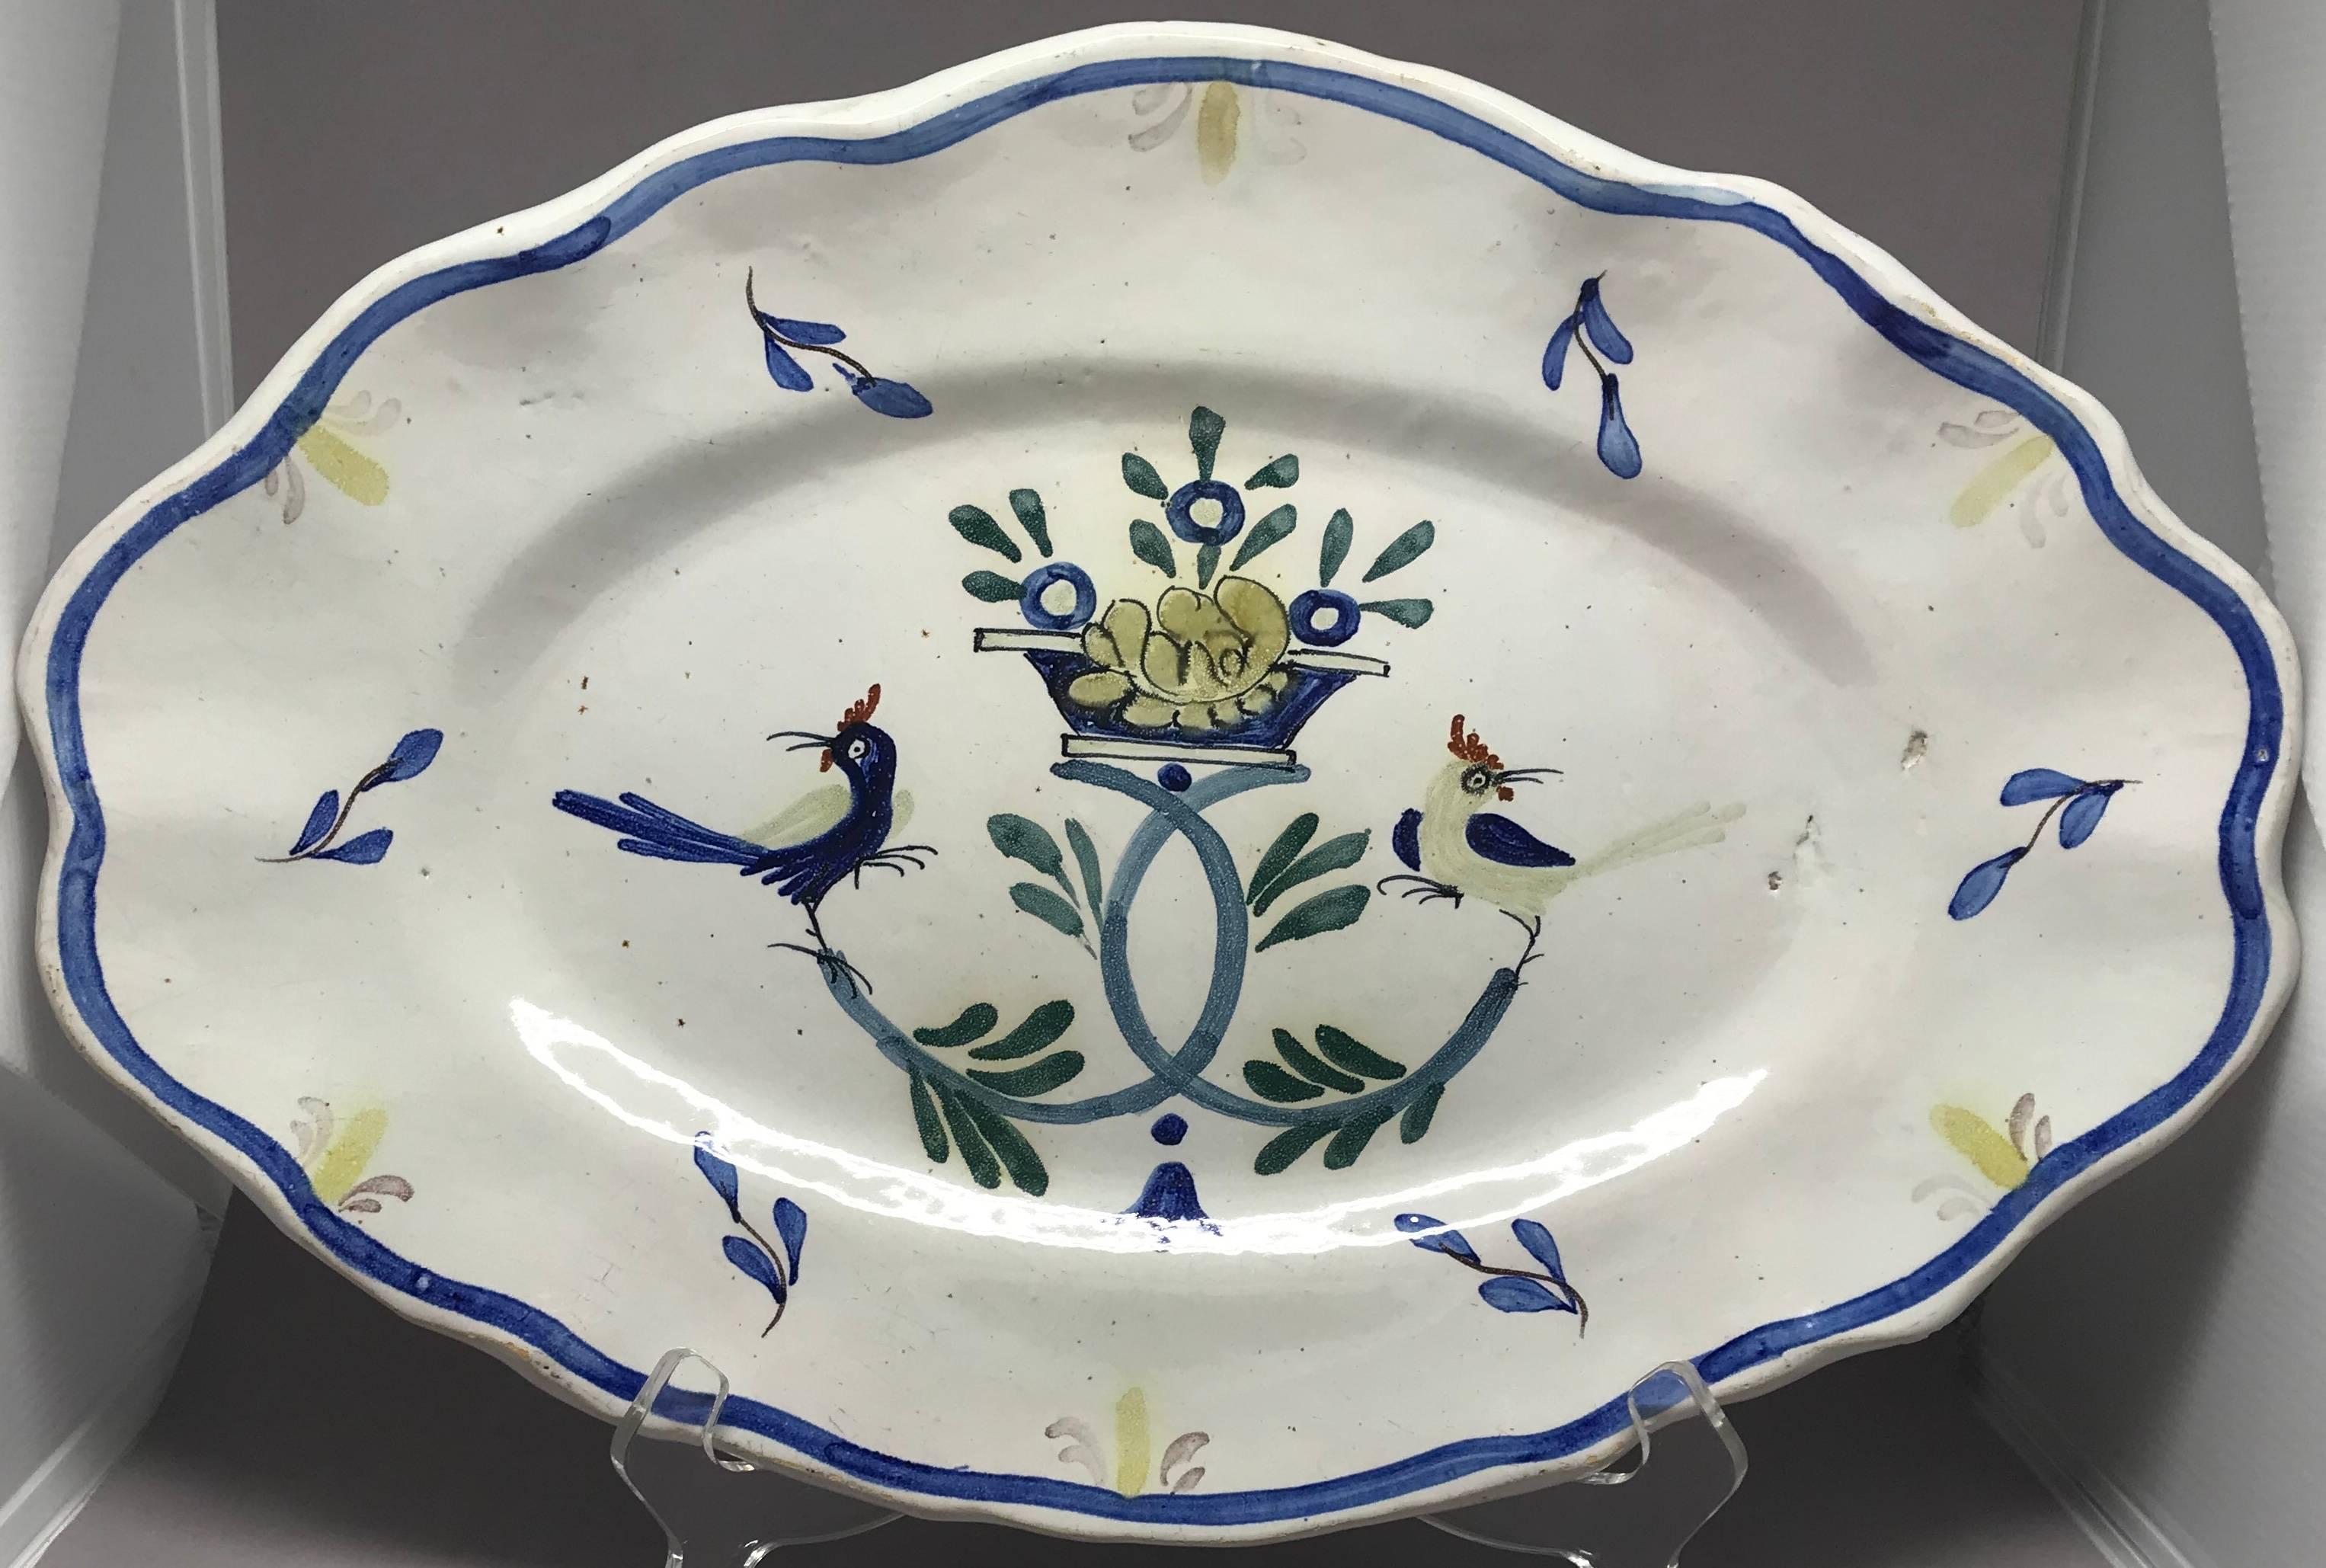 French Faience Bird Platter.  Hand painted scallop edge oval platter in French Country design with flowers and roosters and rich French blue banding.  France, nineteenth century.  
Dimensions: 14.5